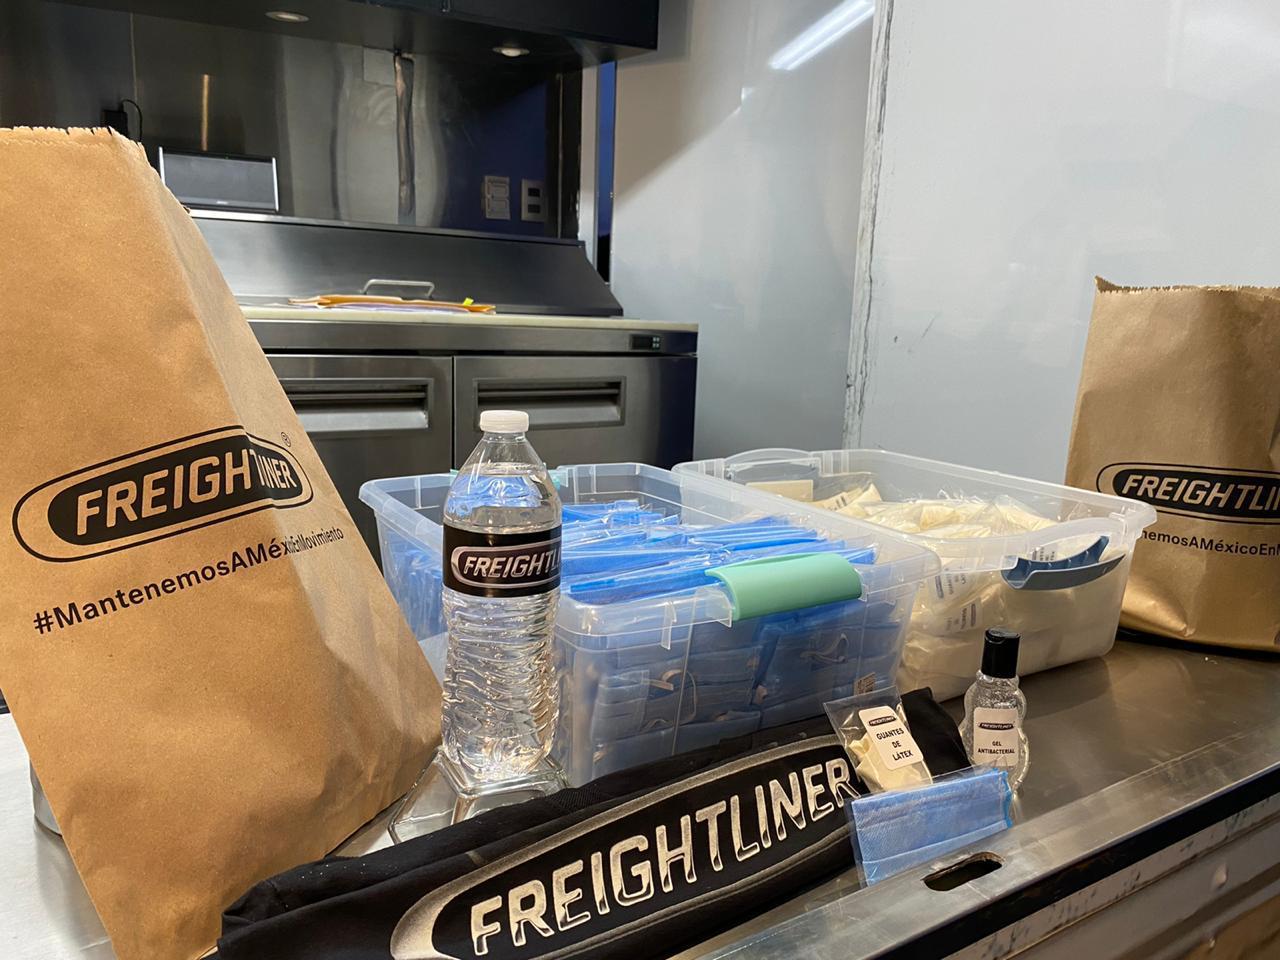 Freightliner delivers contingency support kits to Mexican truck drivers